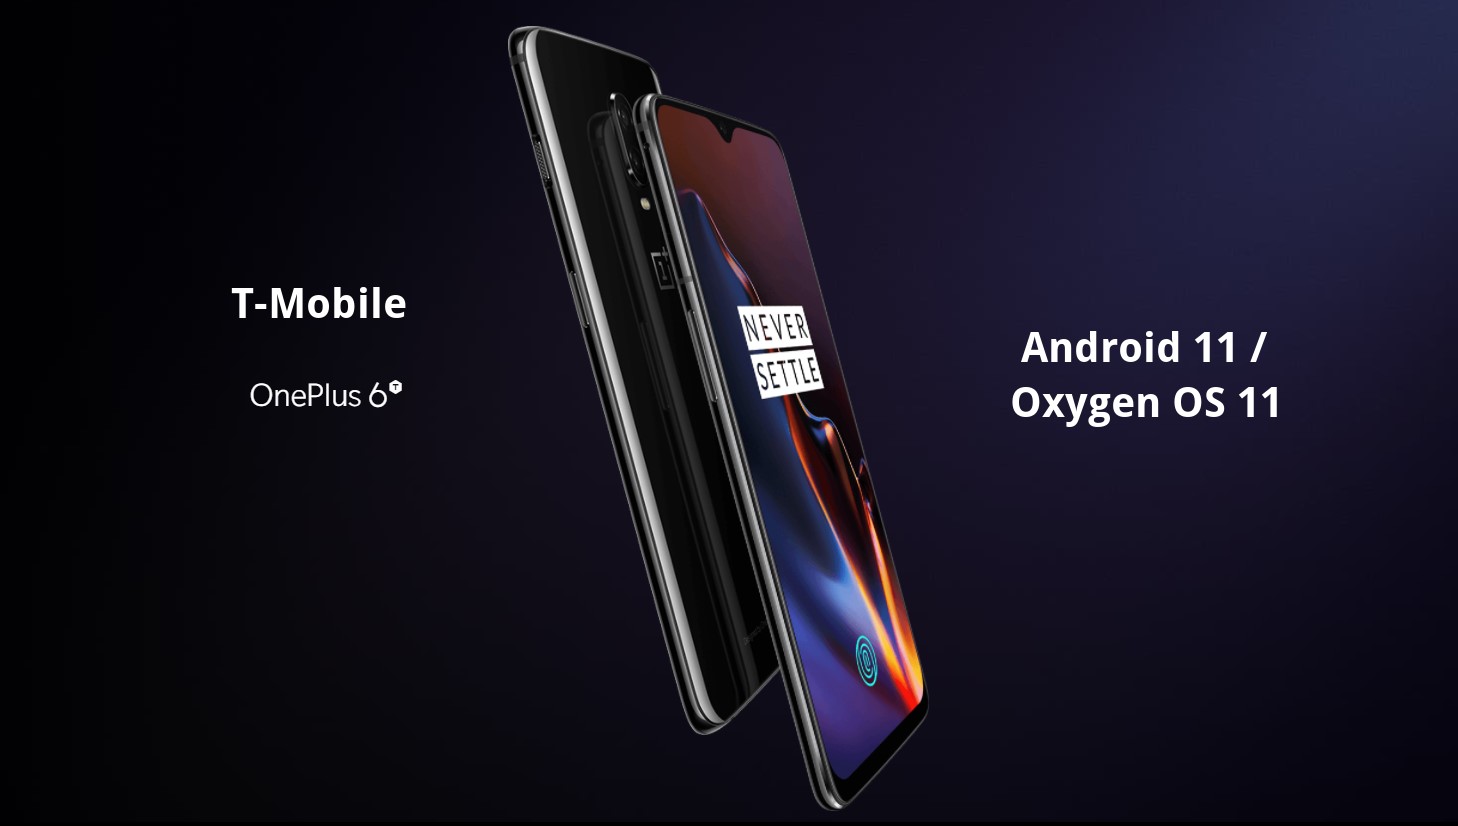 T-Mobile OnePlus 6T Android 11 Oxygen OS 11